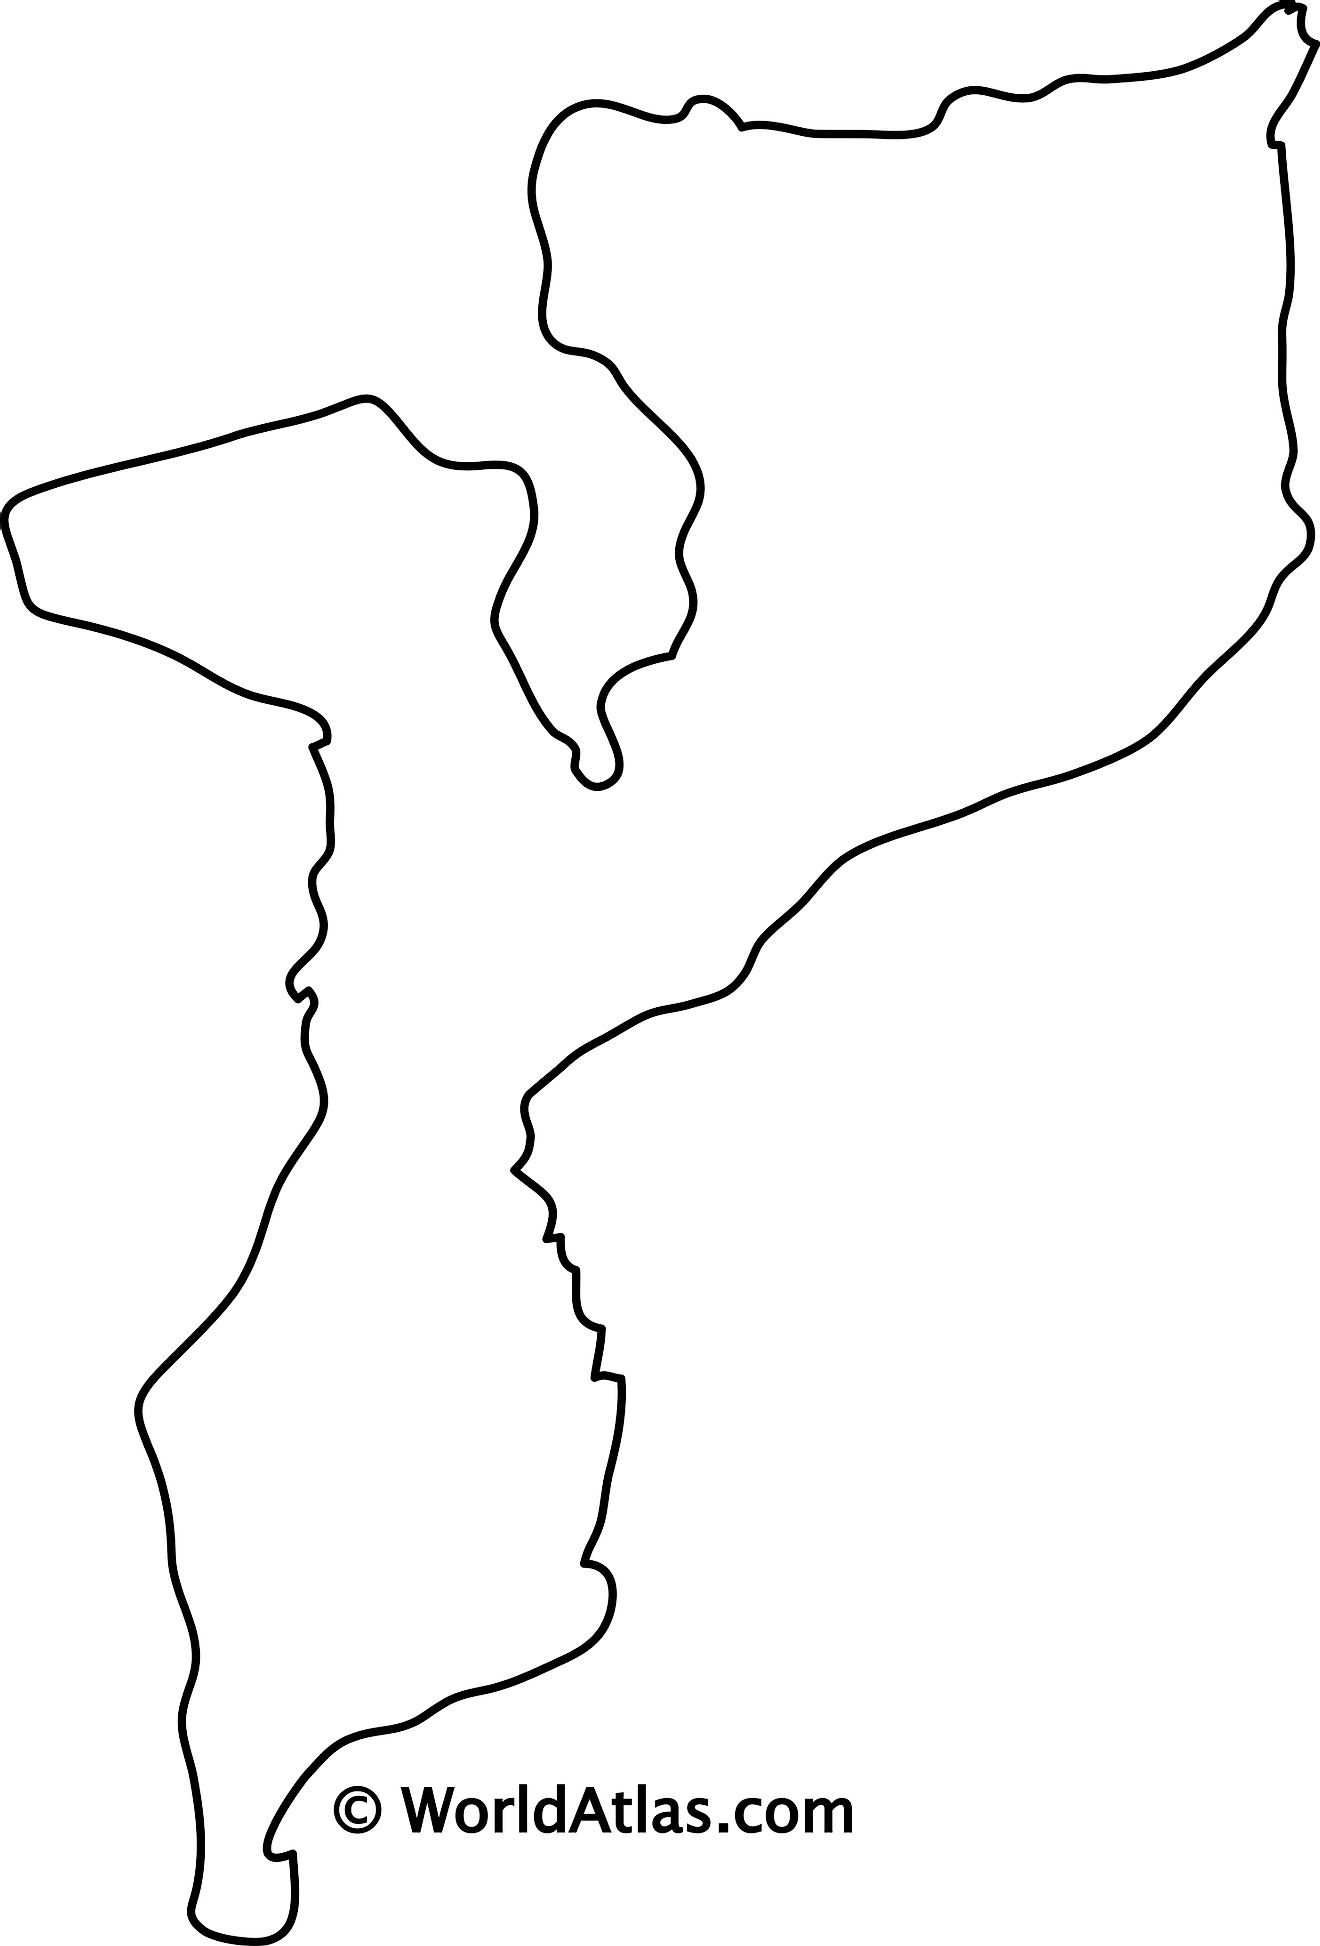 Blank Outline Map of Mozambique